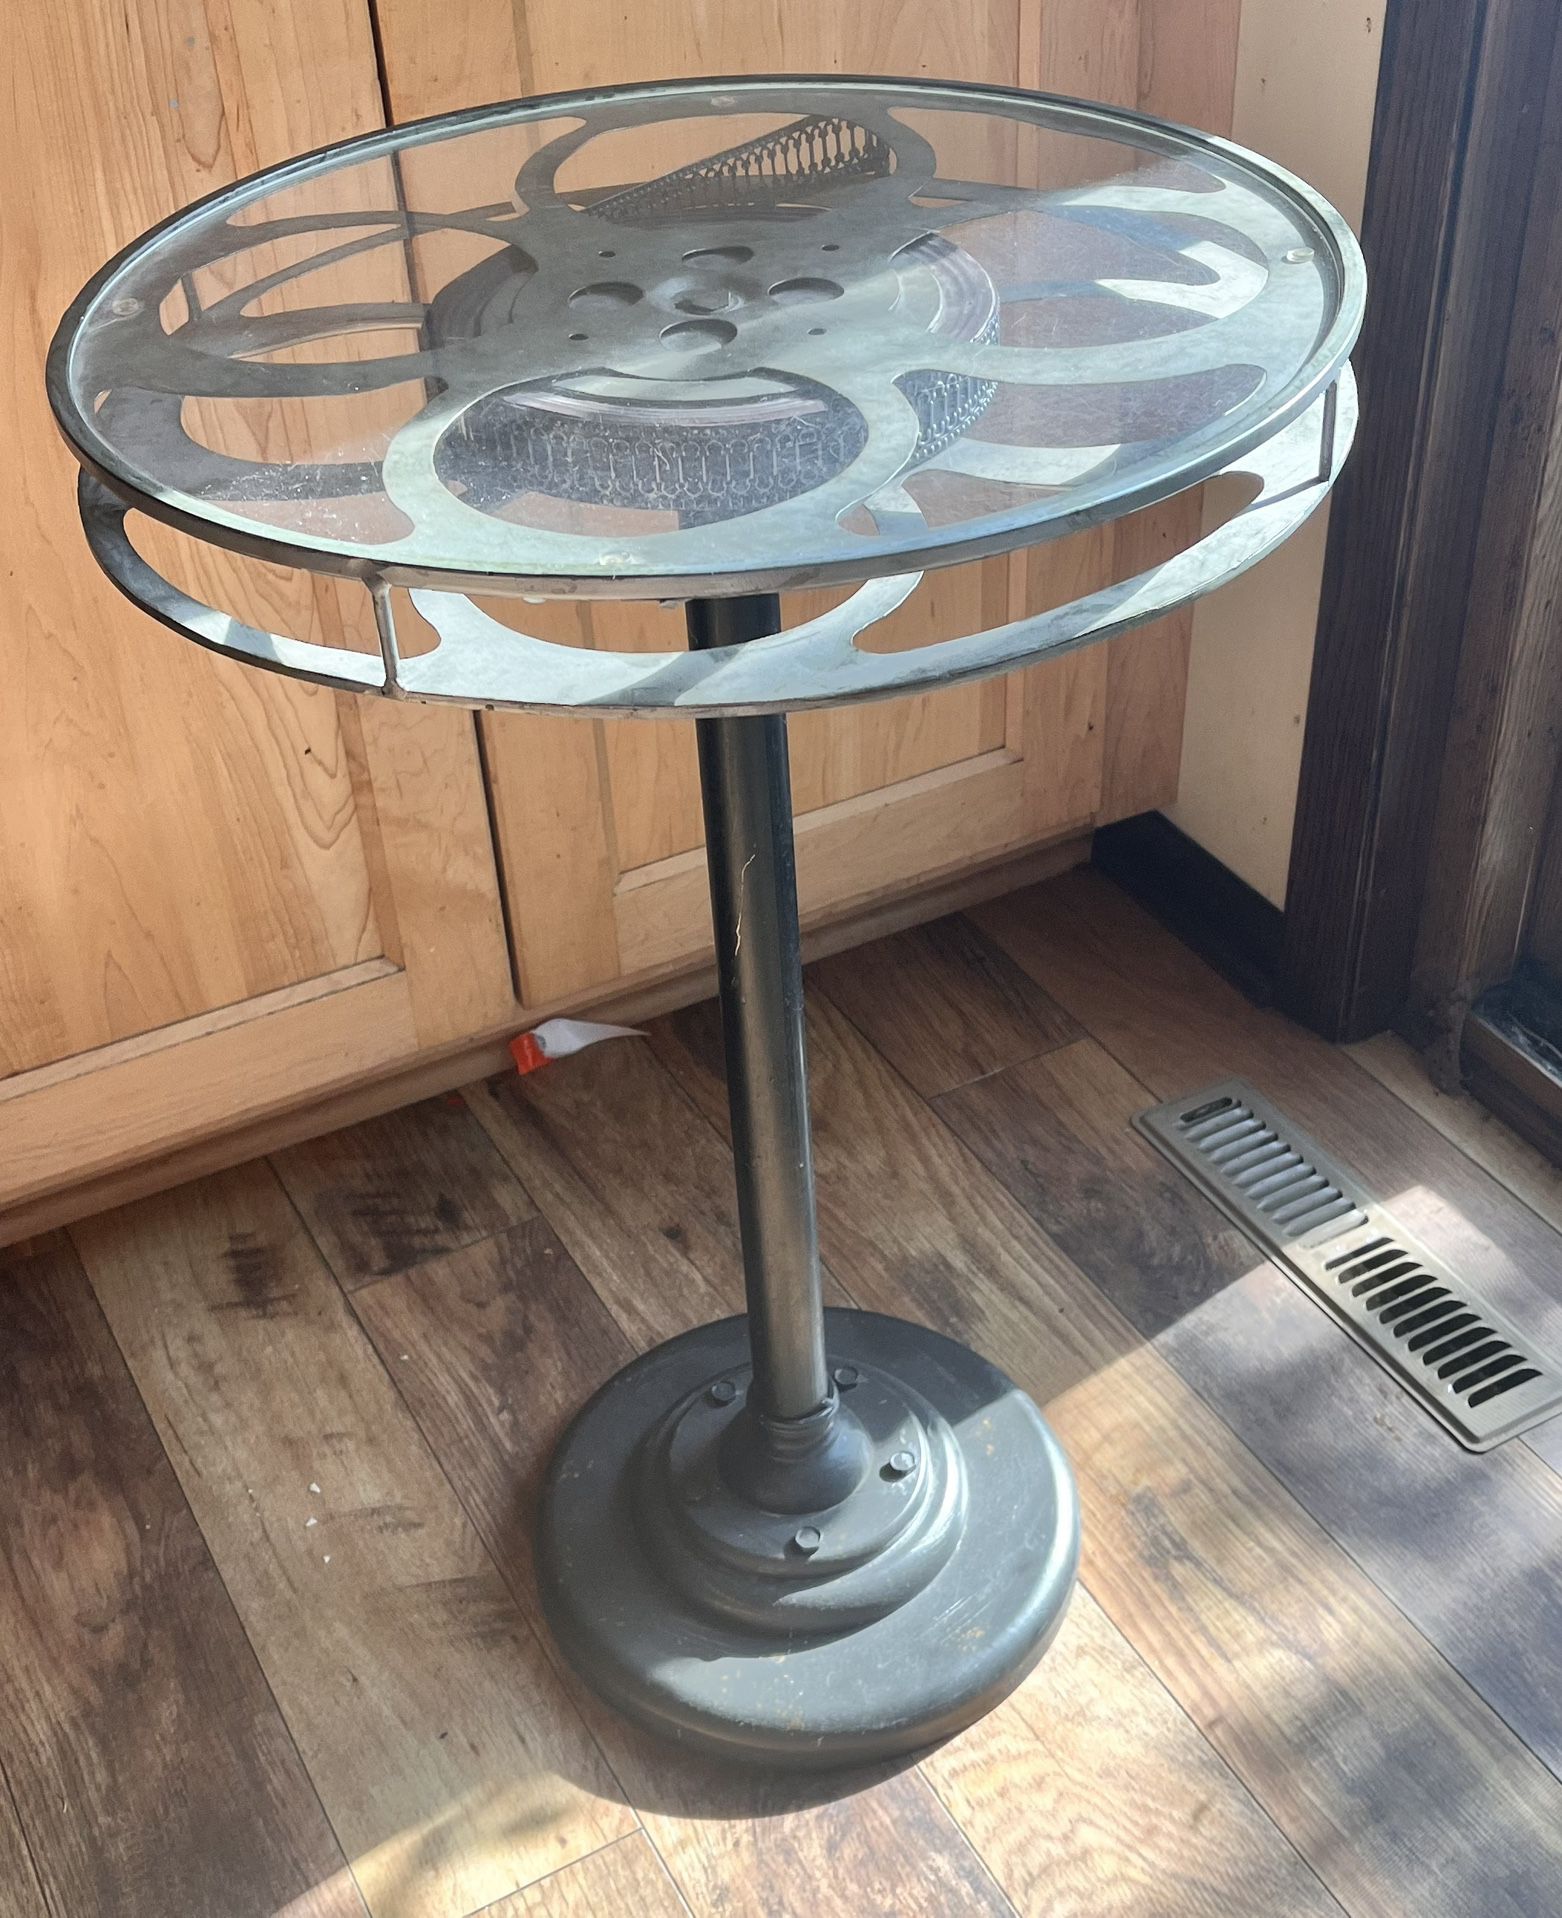 FUJIAN YONGAN MOVIE REEL END TABLE (19dx 28h) for Sale in